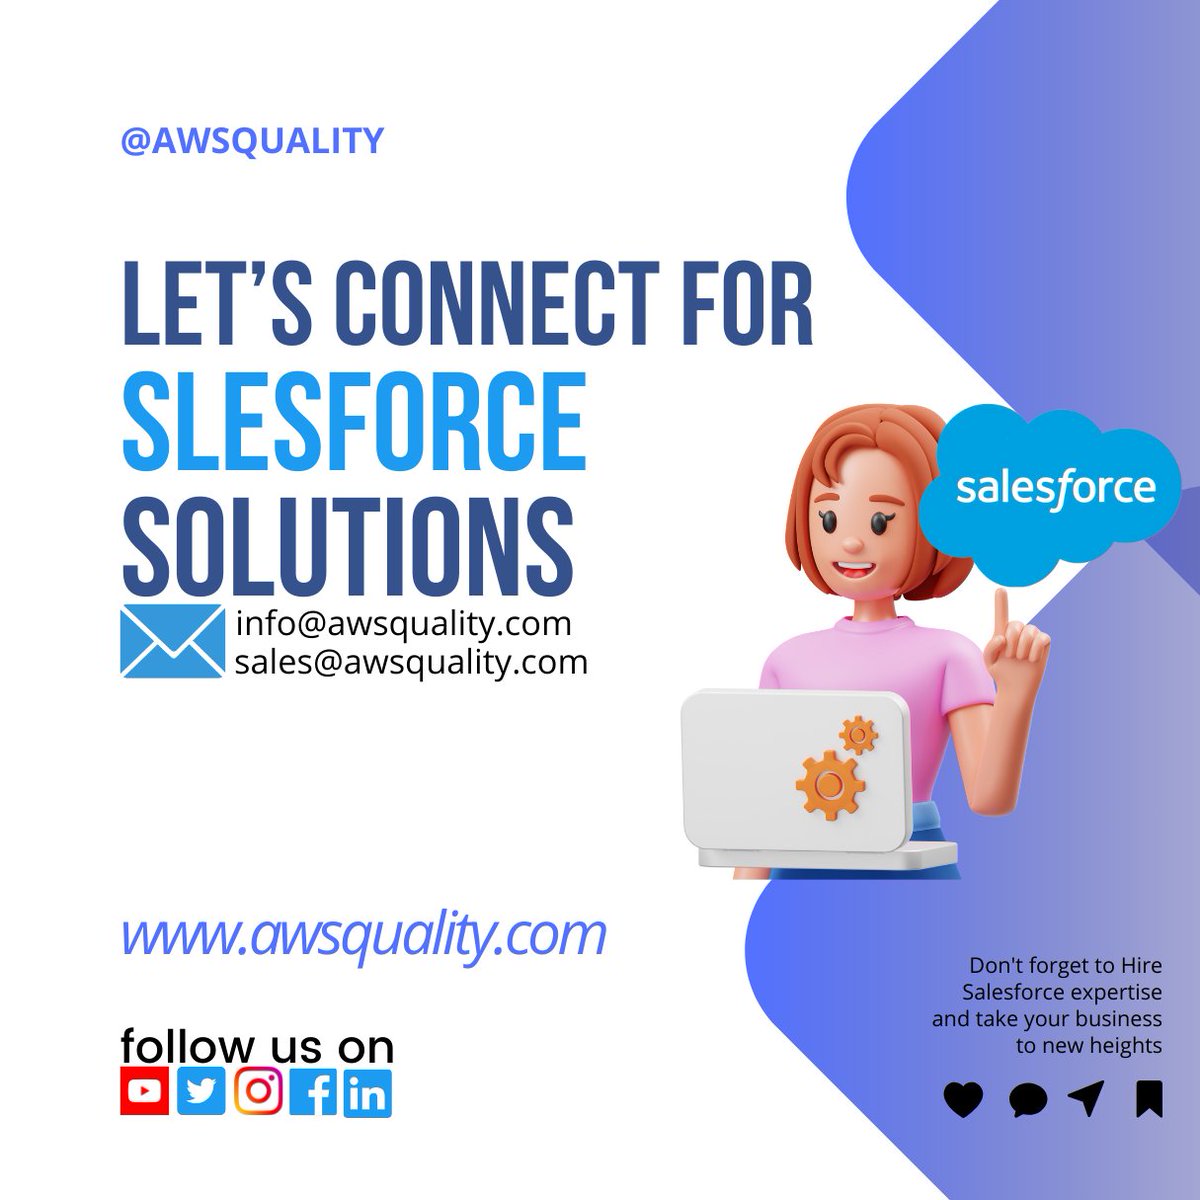 Article-awsquality.com/awsquality-sal… Elevate Your Business with AwsQuality! Go Global, Grow Faster: Attract & Convert Clients with AwsQuality Salesforce & Development Expertise 🌍awsquality.com #salesforce #trailblazer #factory #Enterpreneur #crm